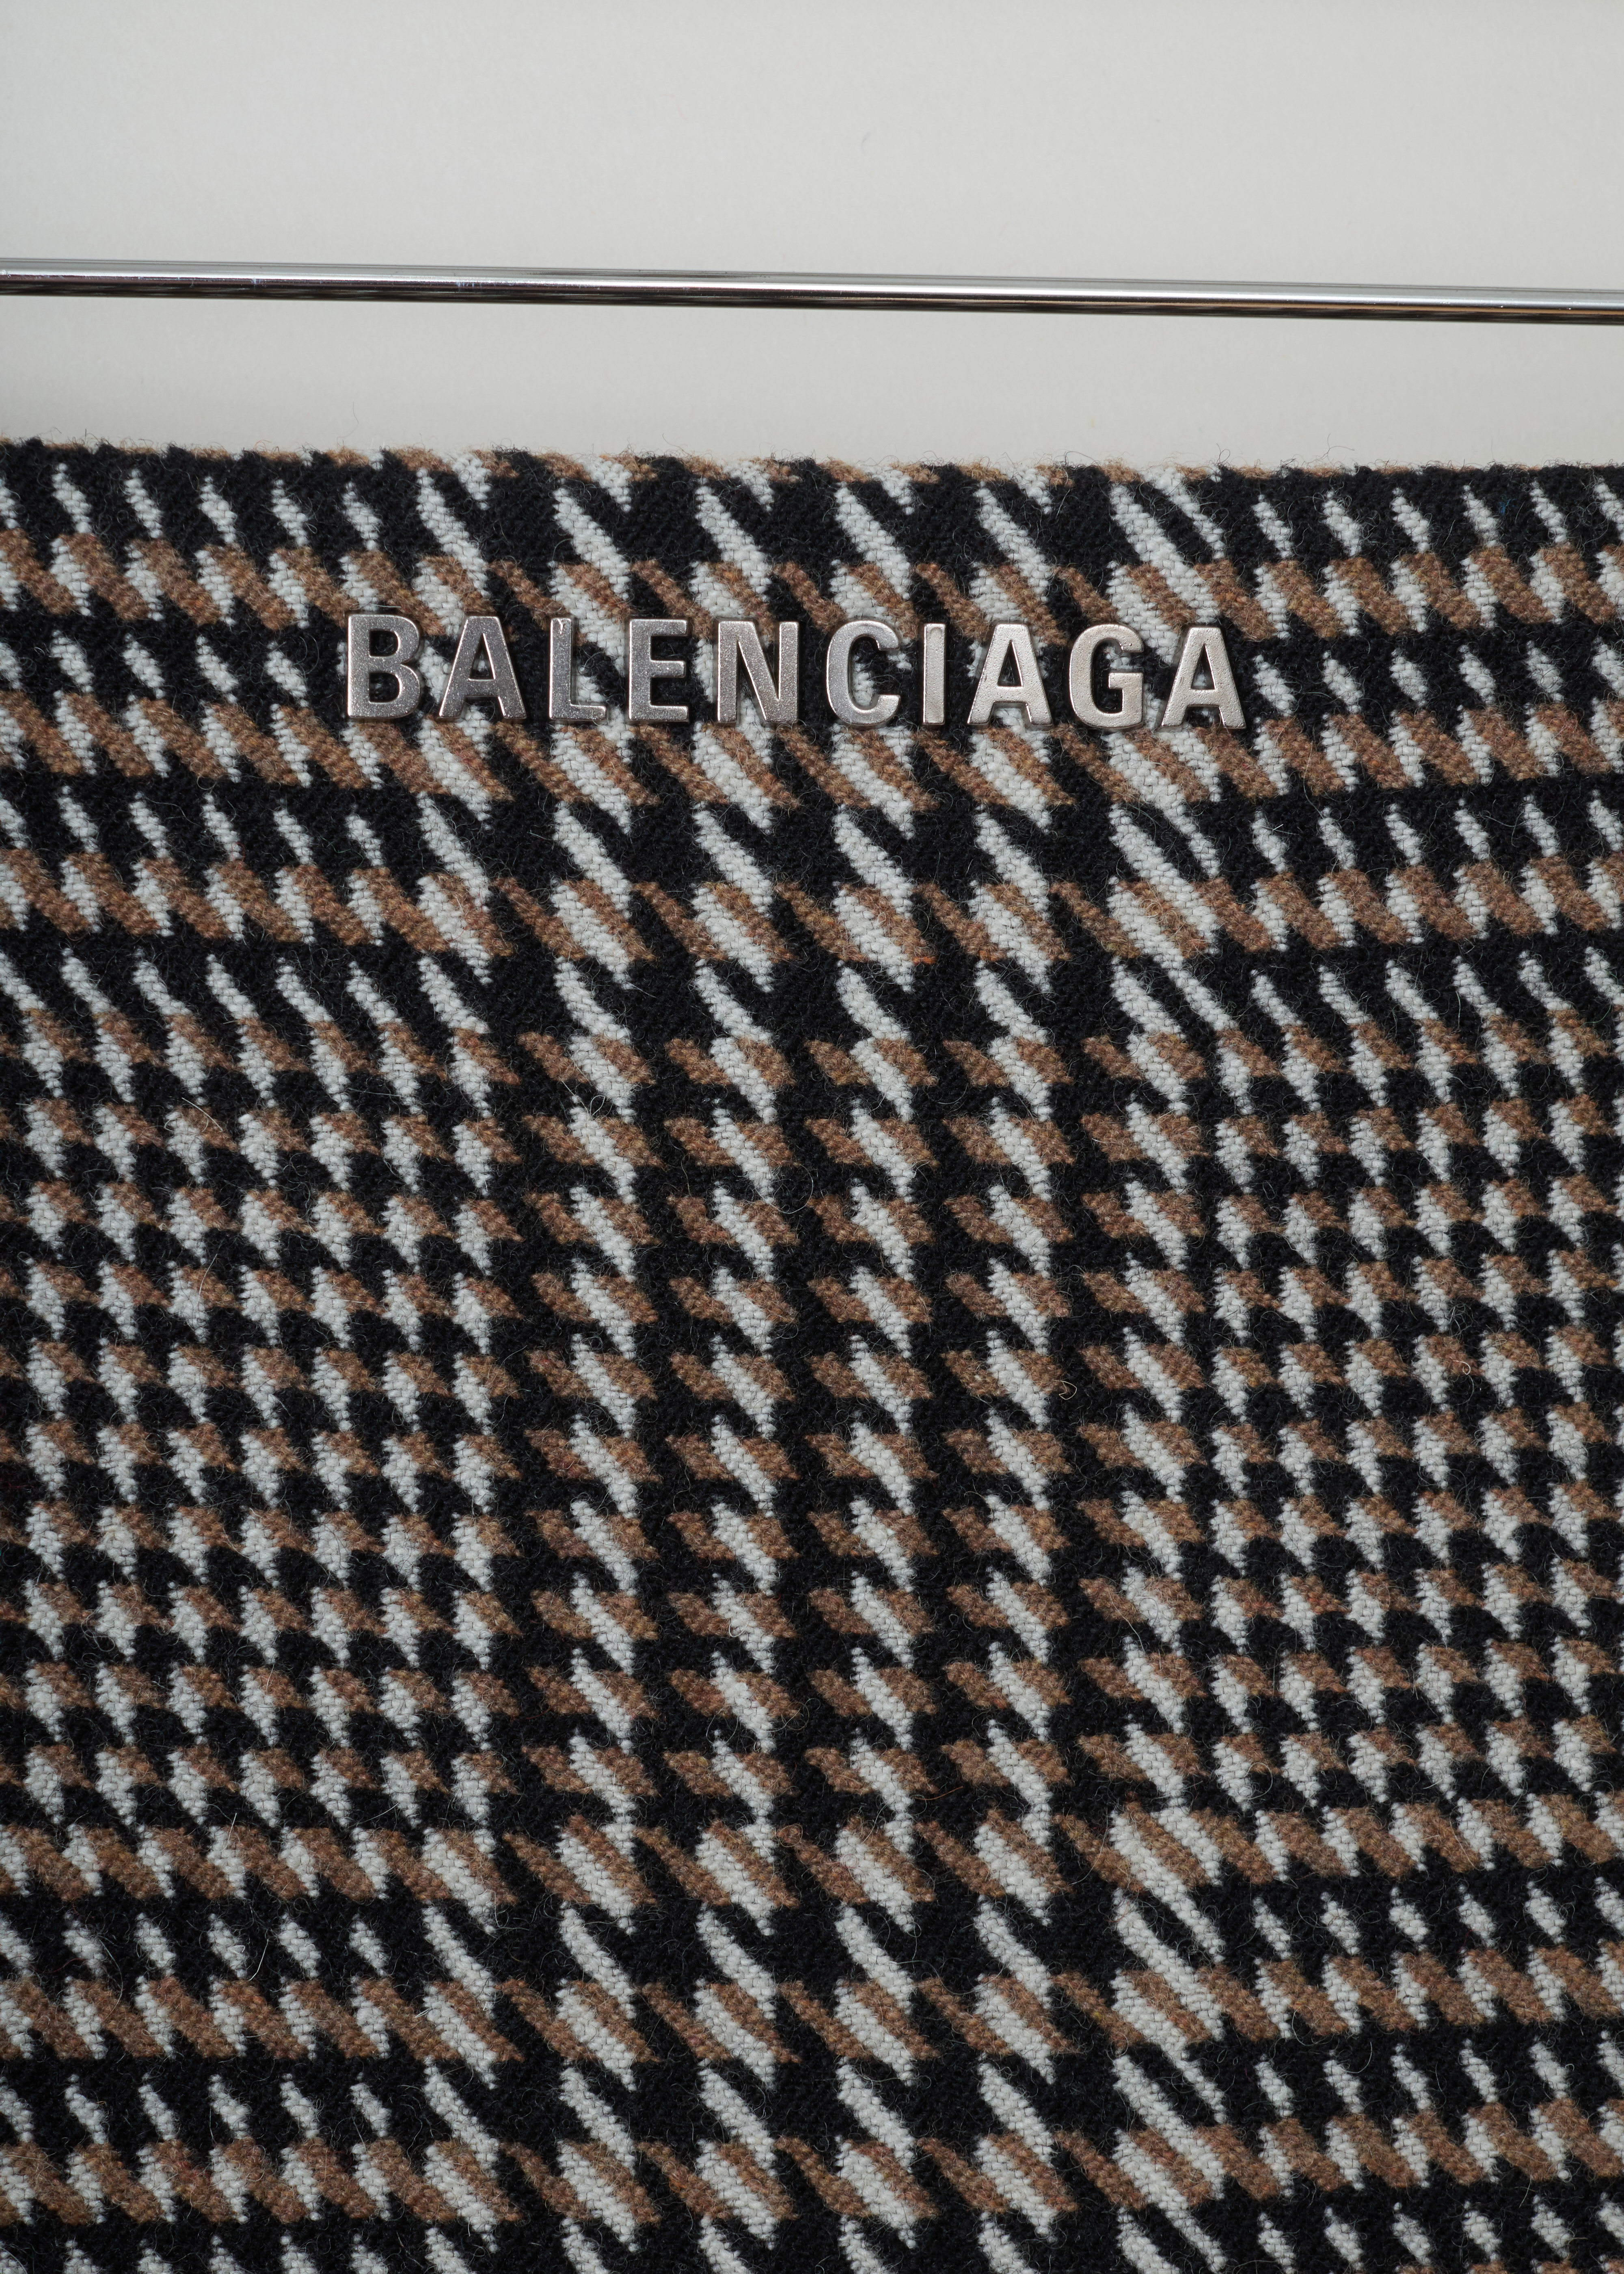 Balenciaga Tweed pencil skirt 528505_TBU21_2684 brown black detail. Pencil skirt in brown, black and white tweed with a tailored fit, Balenciaga logo printed on the front, centre back split and an invisible zipper fastening at the back.